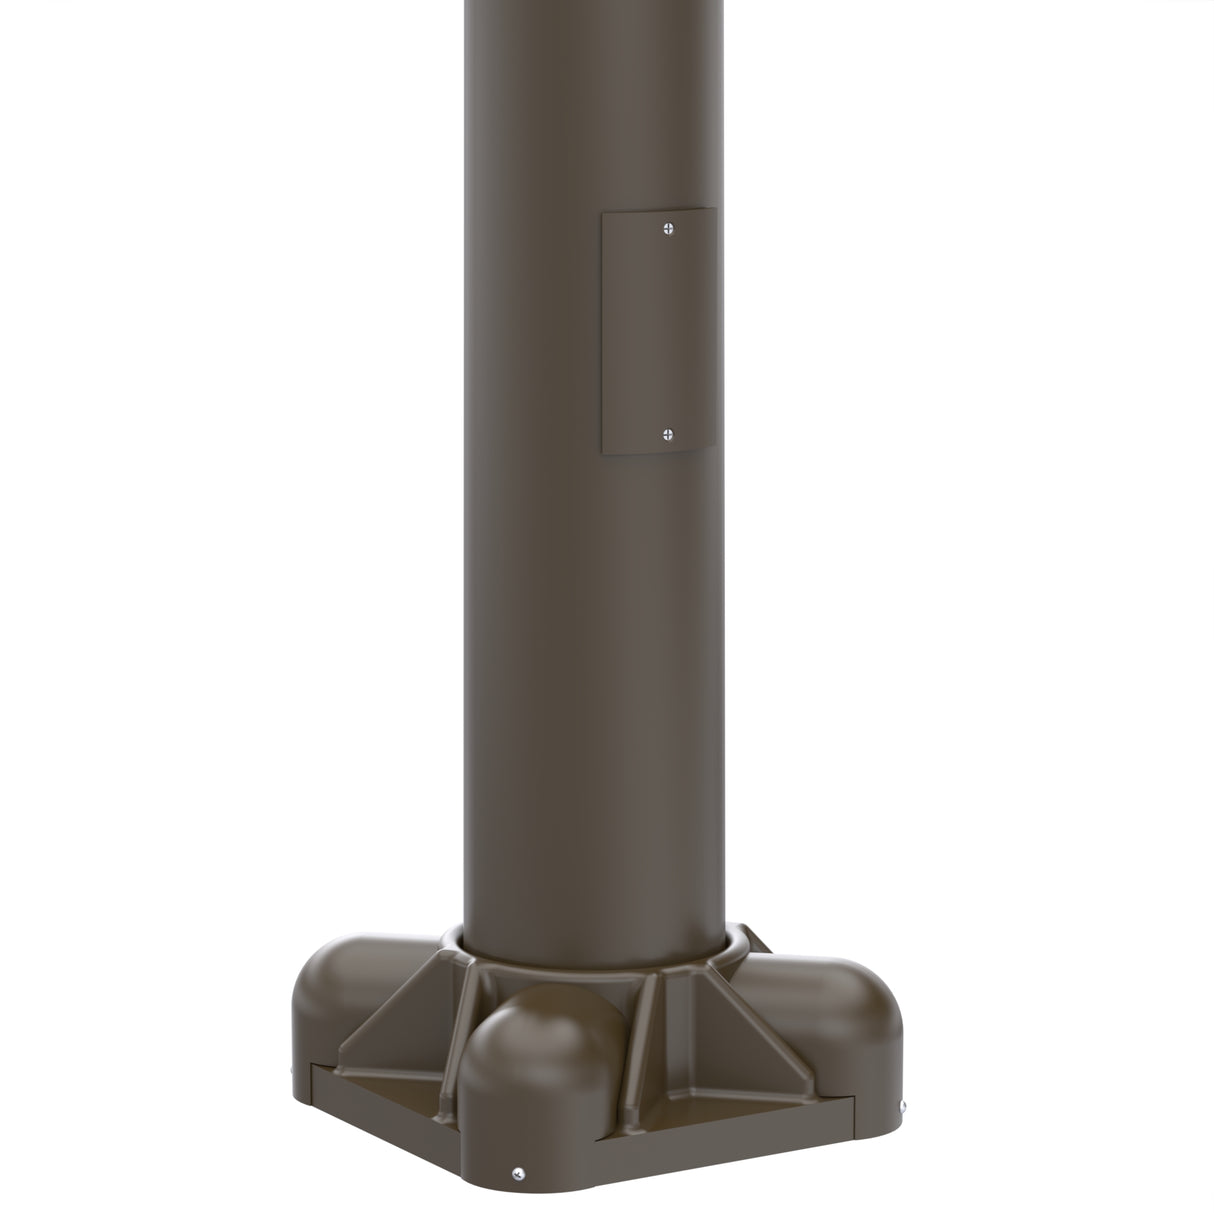 35' Tall x 8.0" Base OD x 4.5" Top OD x 0.156" Thick, Round Tapered Aluminum, Anchor Base Light Pole